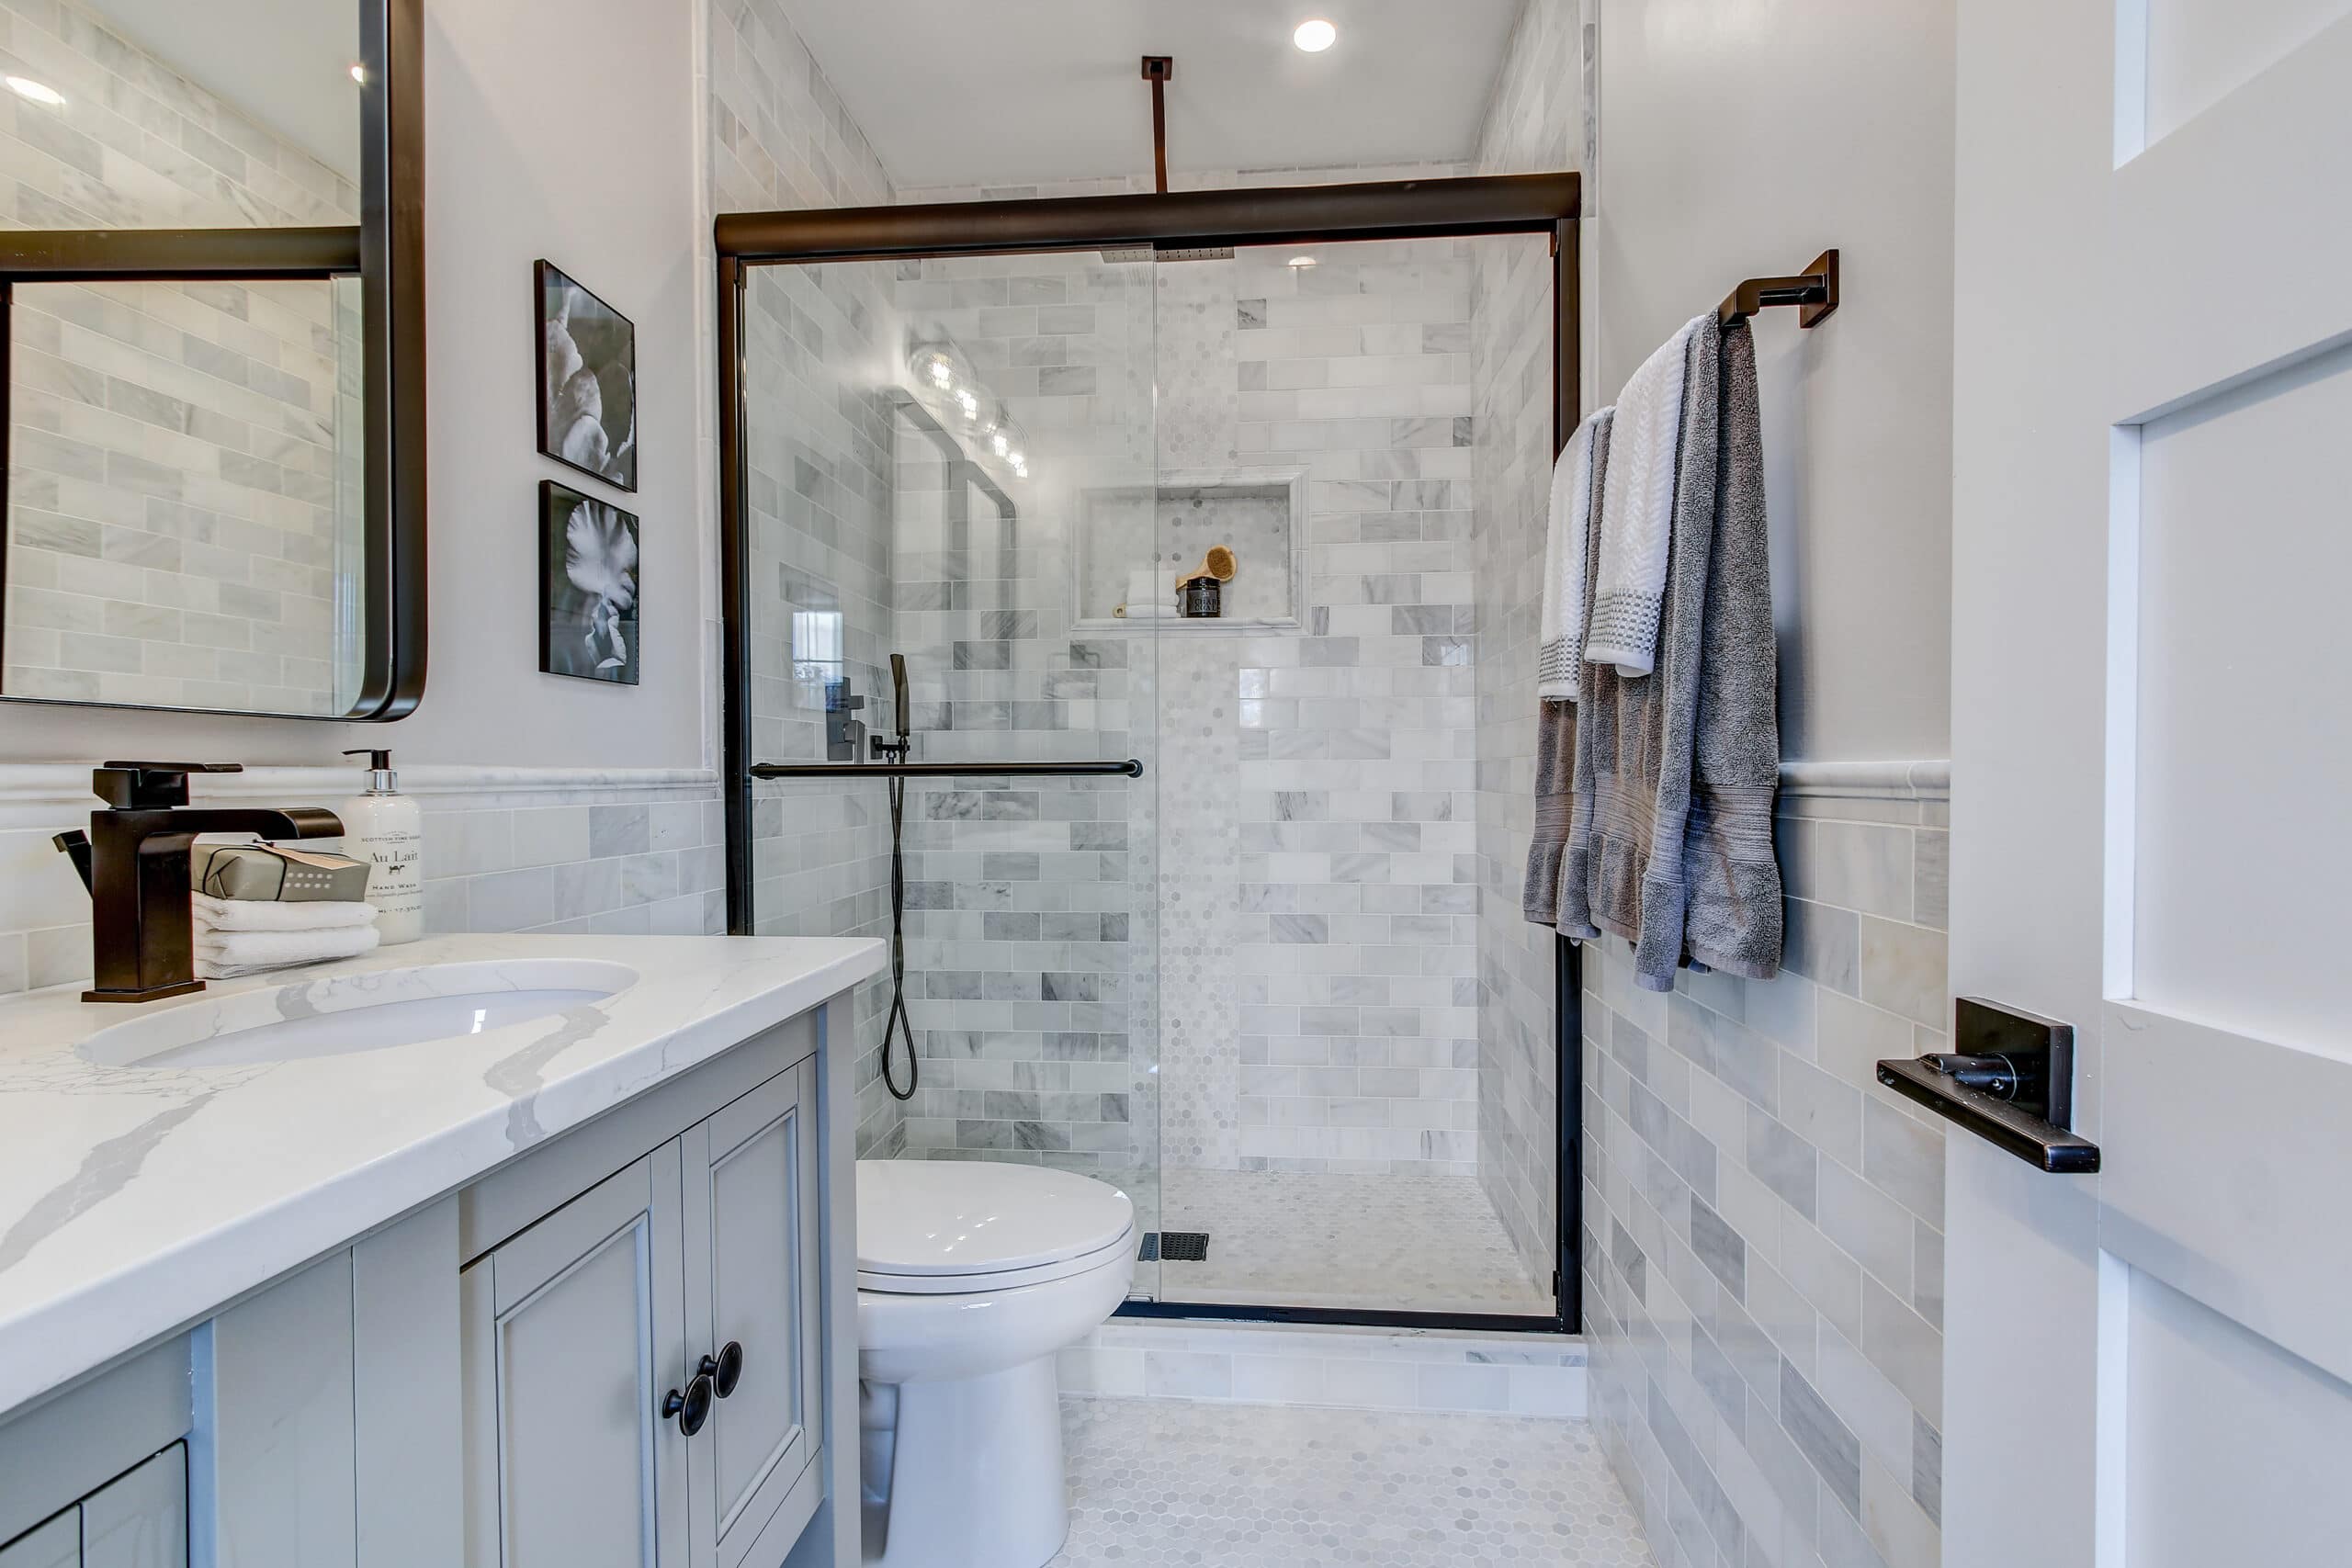 How To Add A Basement Bathroom And Do It The Right Way - Can You Put A Bathroom In The Basement